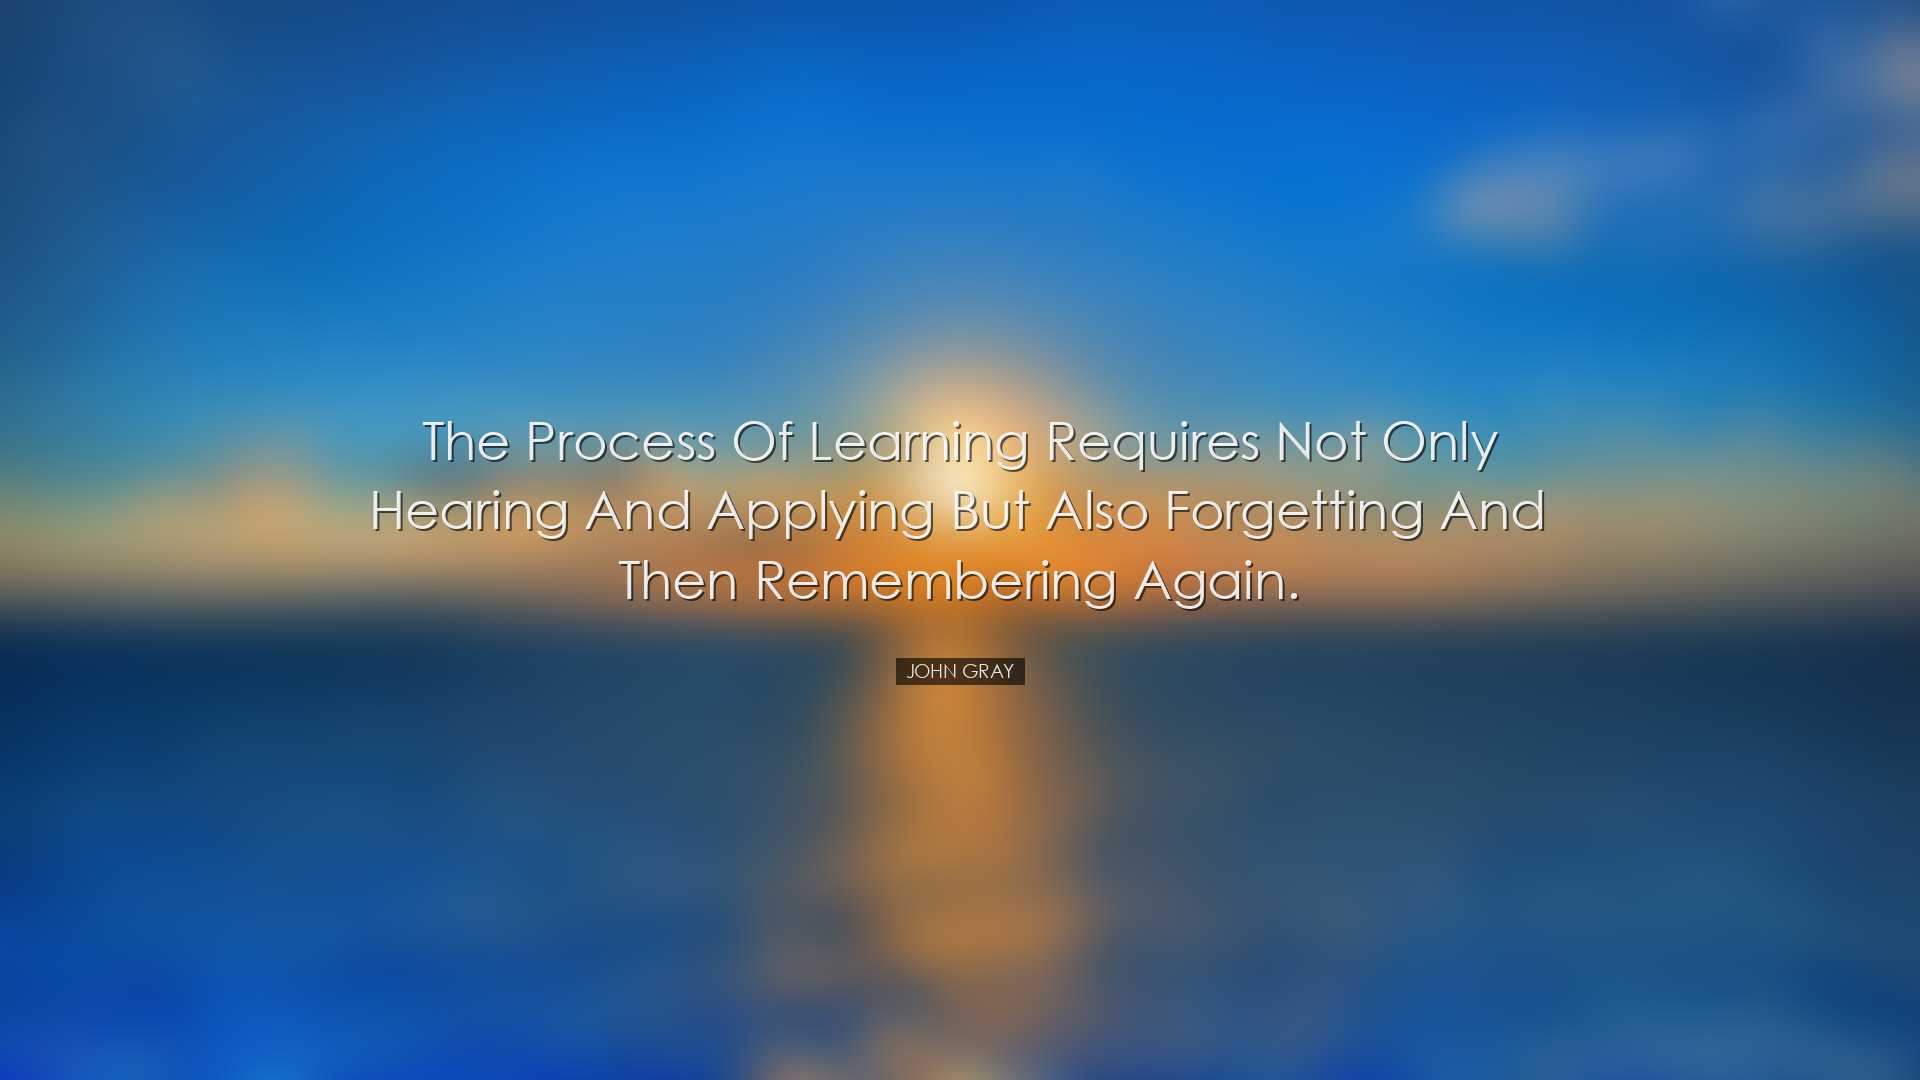 The process of learning requires not only hearing and applying but